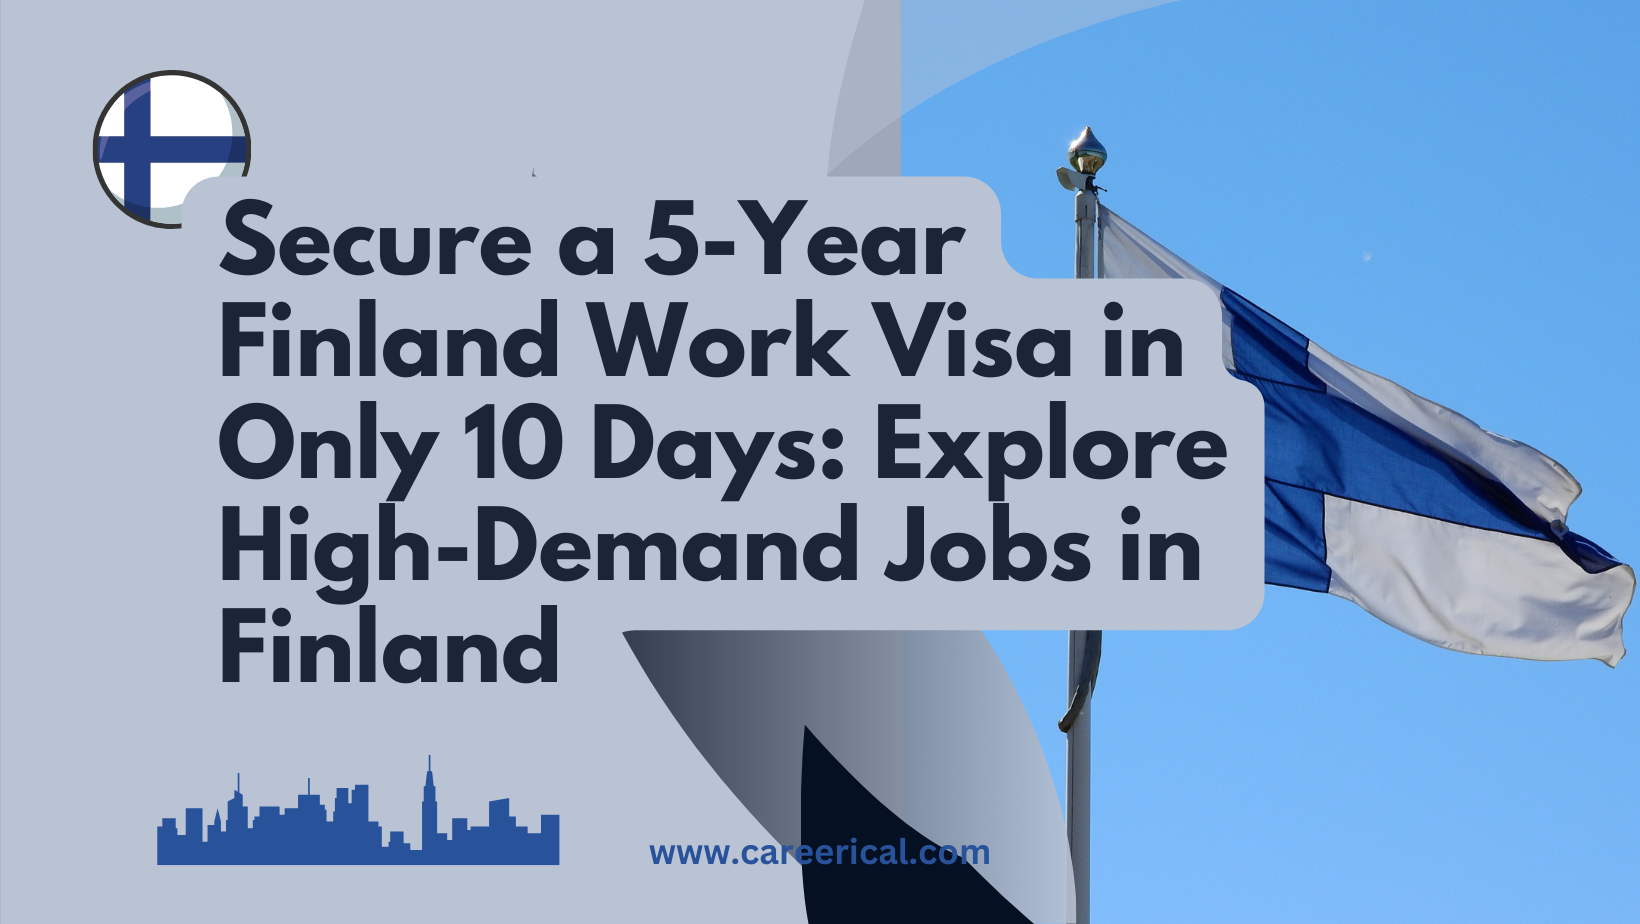 Secure a 5-Year Finland Work Visa in Only 10 Days Explore High-Demand Jobs in Finland